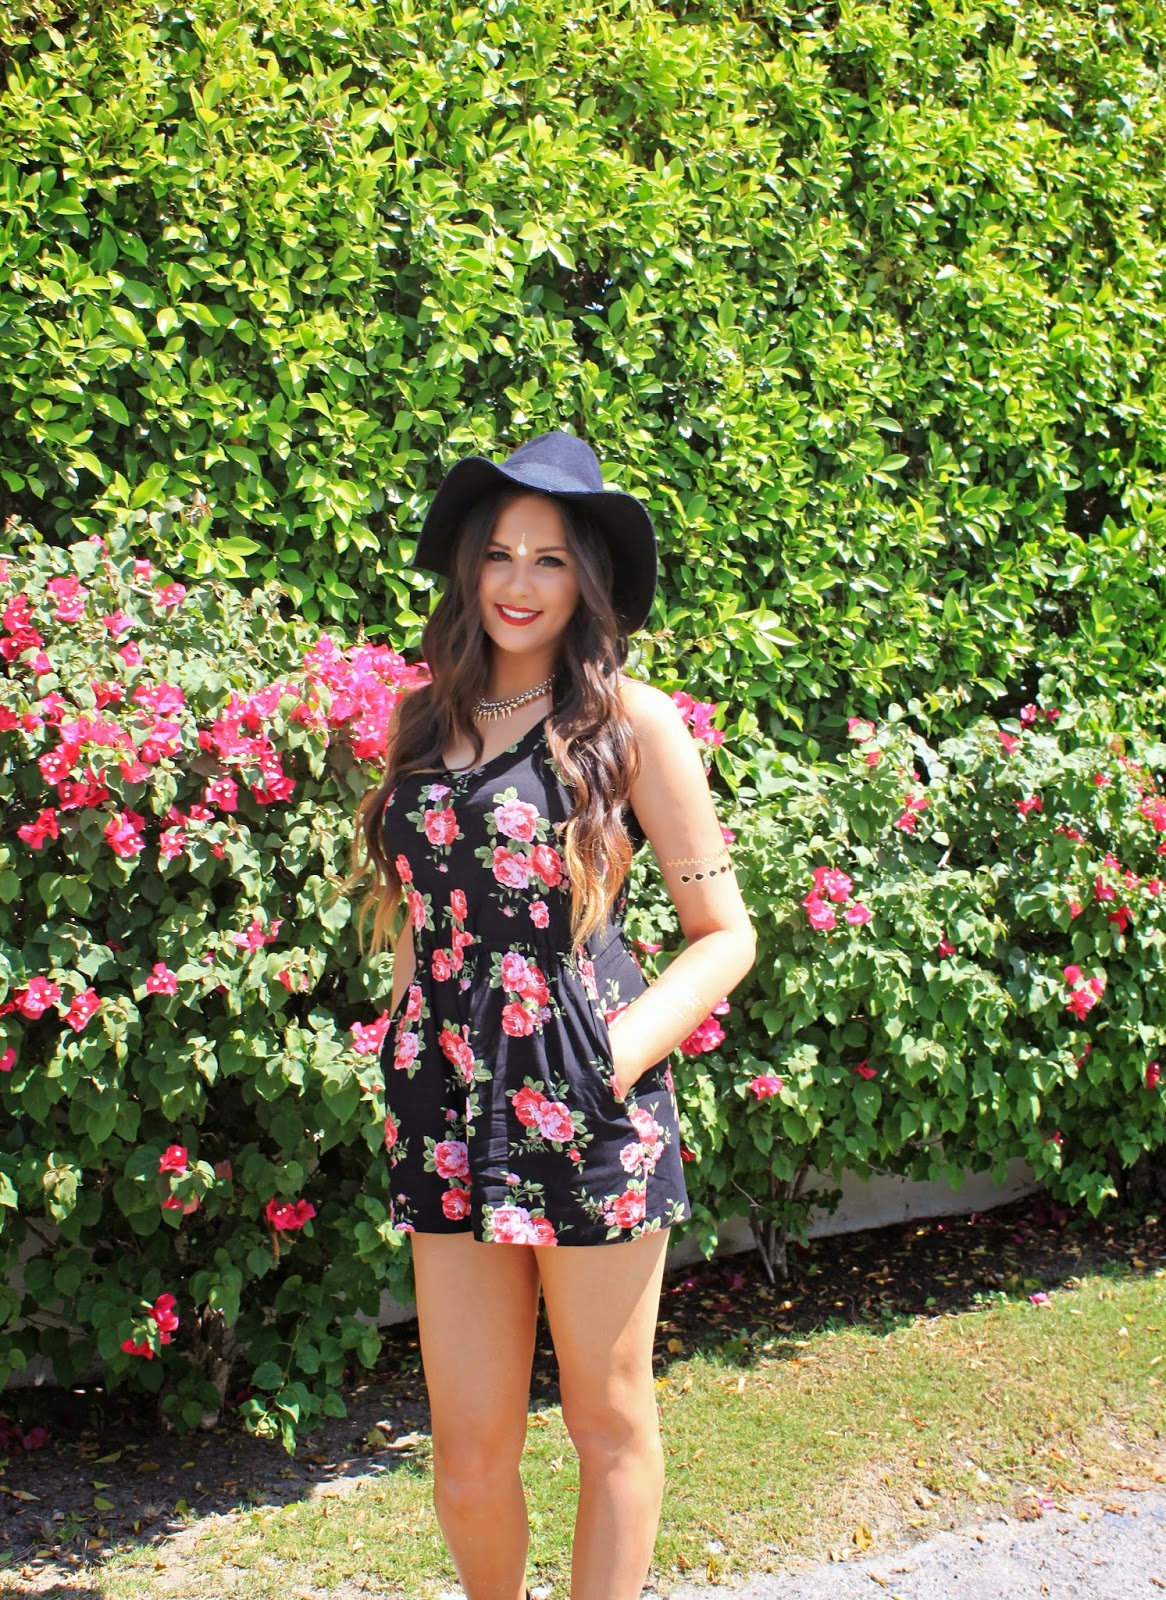 Fashion blogger Mash Elle shares the perfect Forever 21 romper for Coachella - What to Wear to Coachella by popular Orlando fashion blogger, Mash Elle